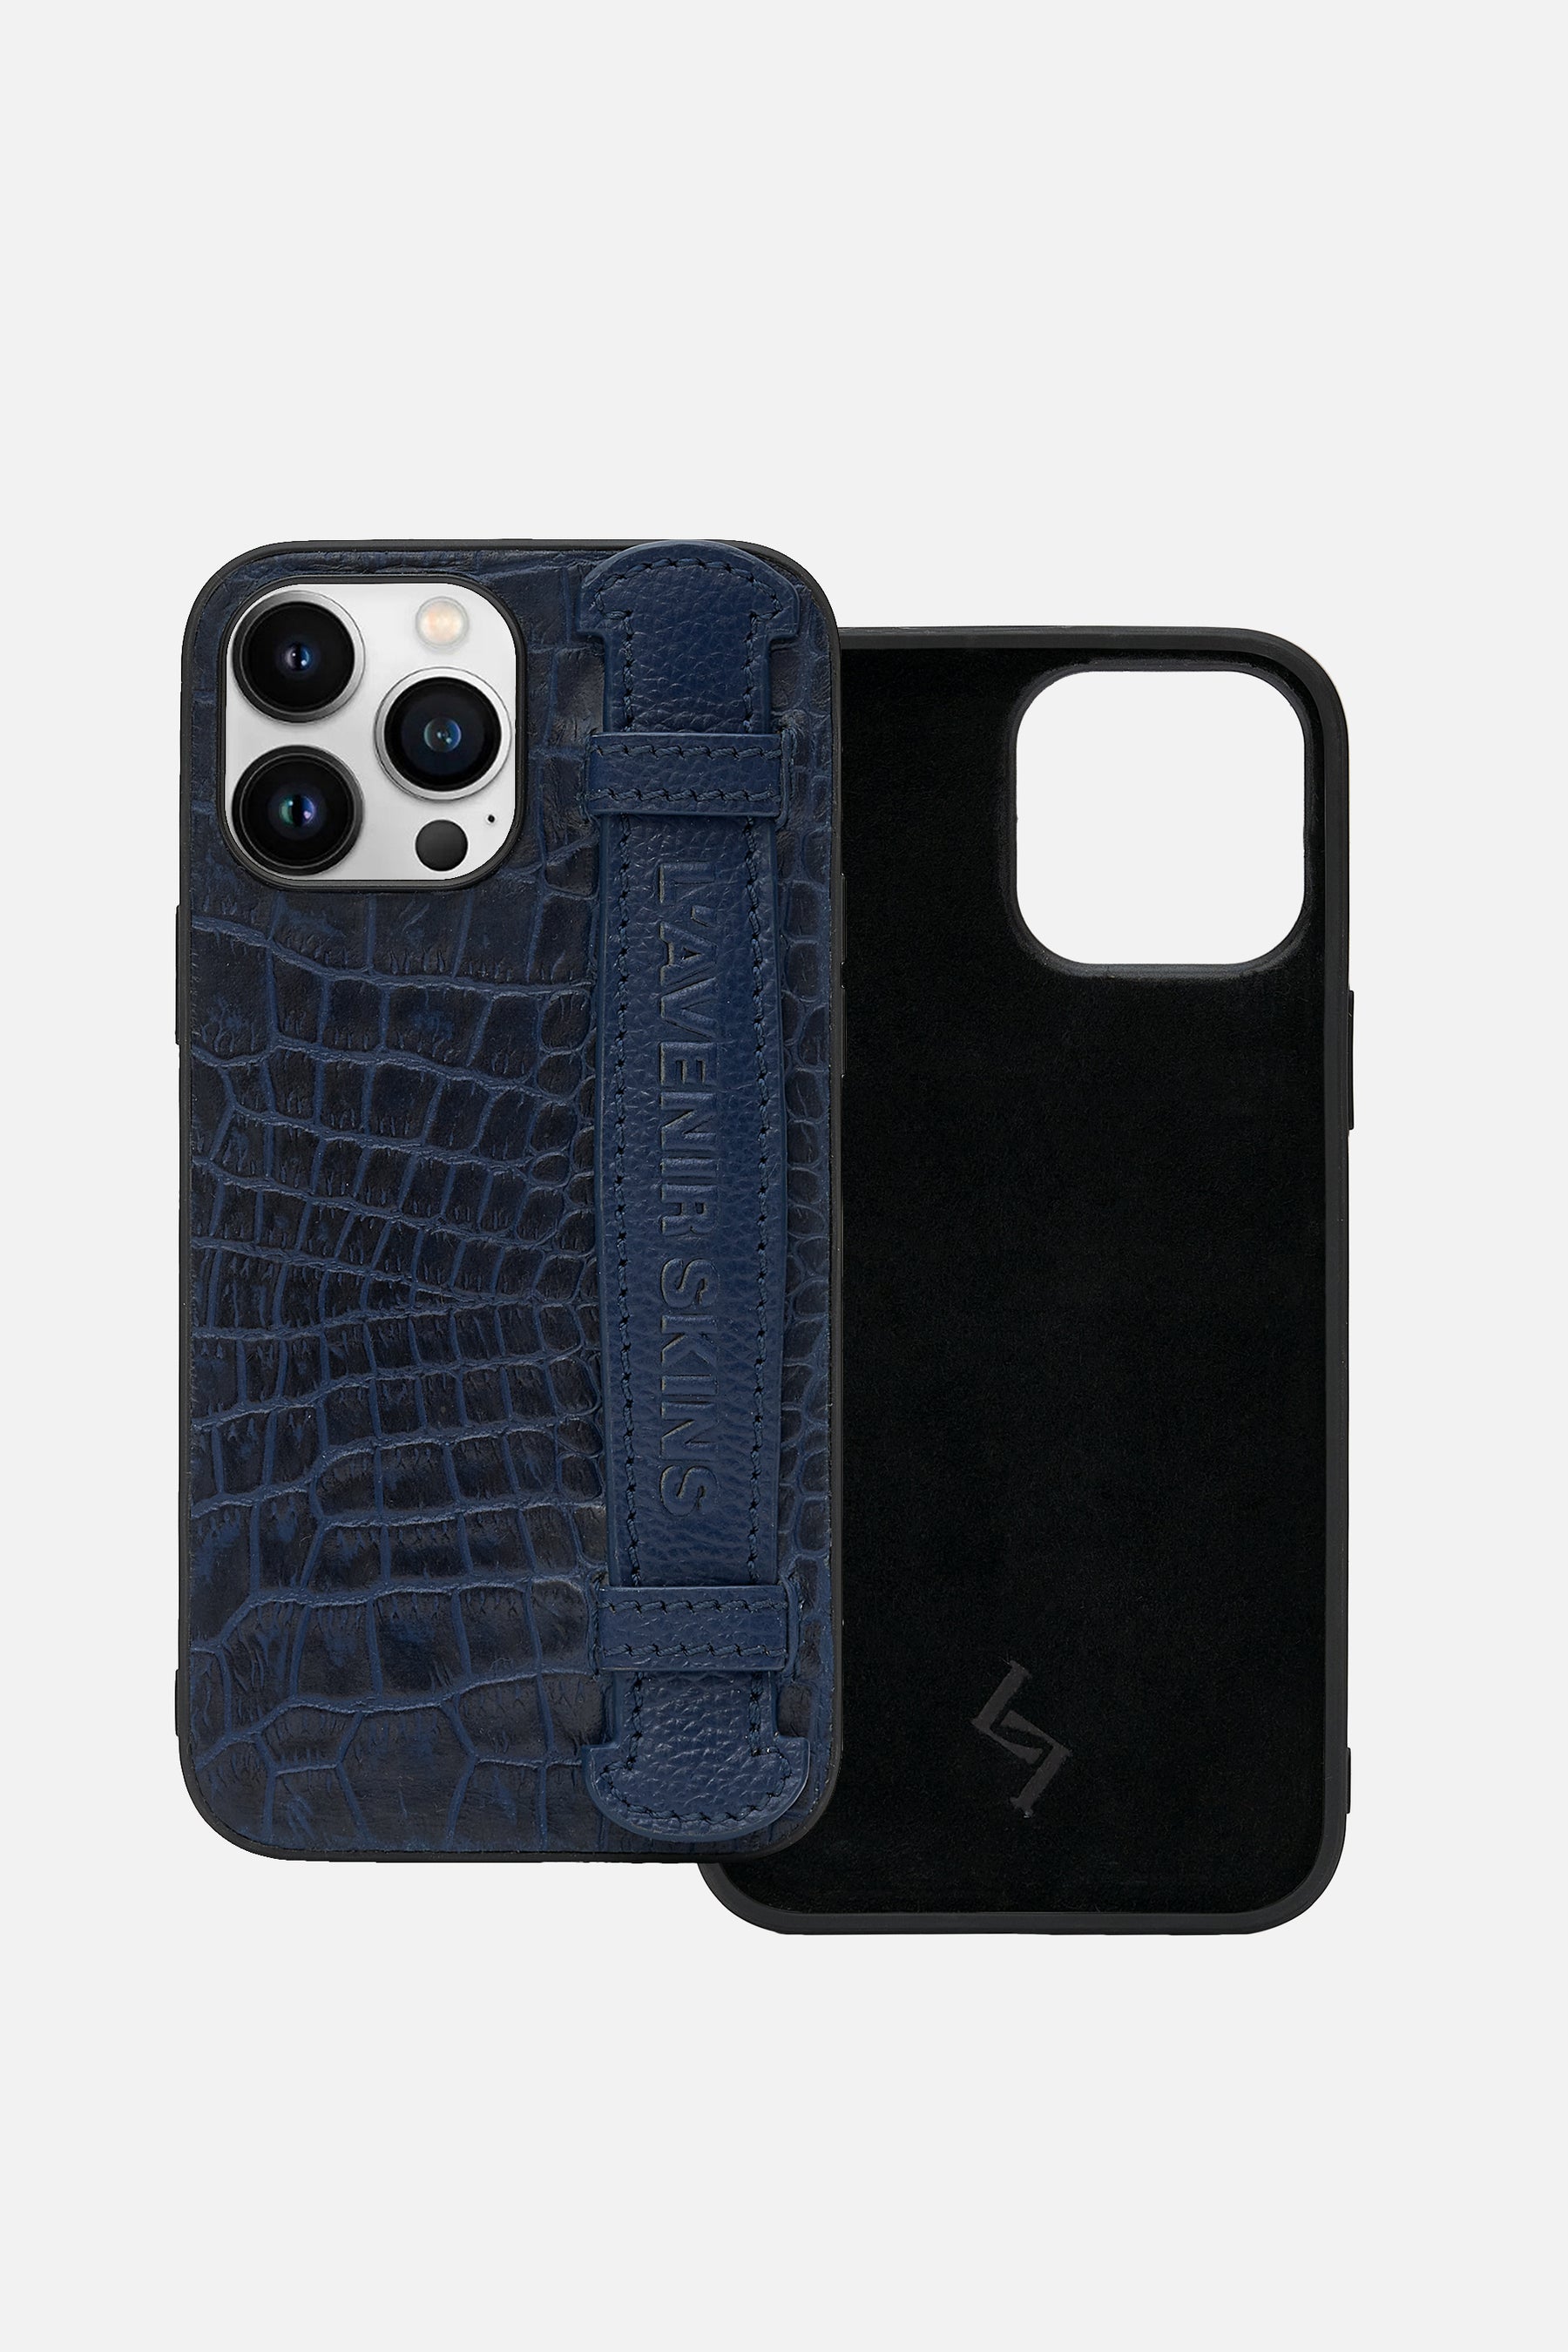 Iphone Case With Strap - Croco Ocean Caven Blue